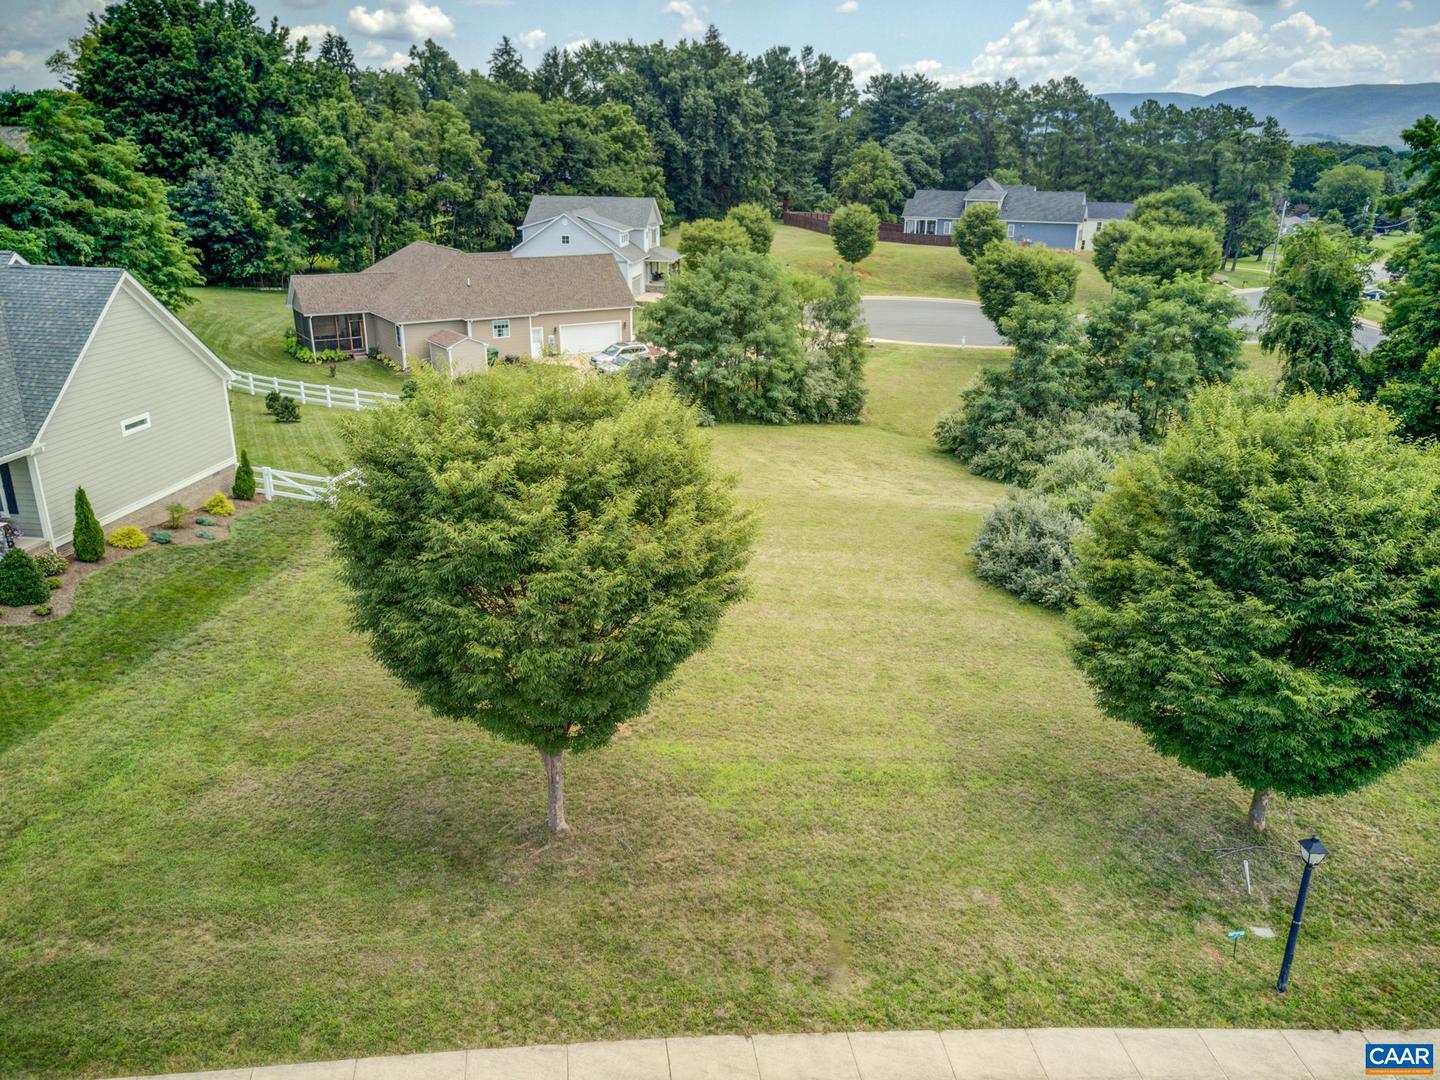 TBD FOREST AVE #11, WAYNESBORO, Virginia 22980, ,Land,For sale,TBD FOREST AVE #11,644742 MLS # 644742